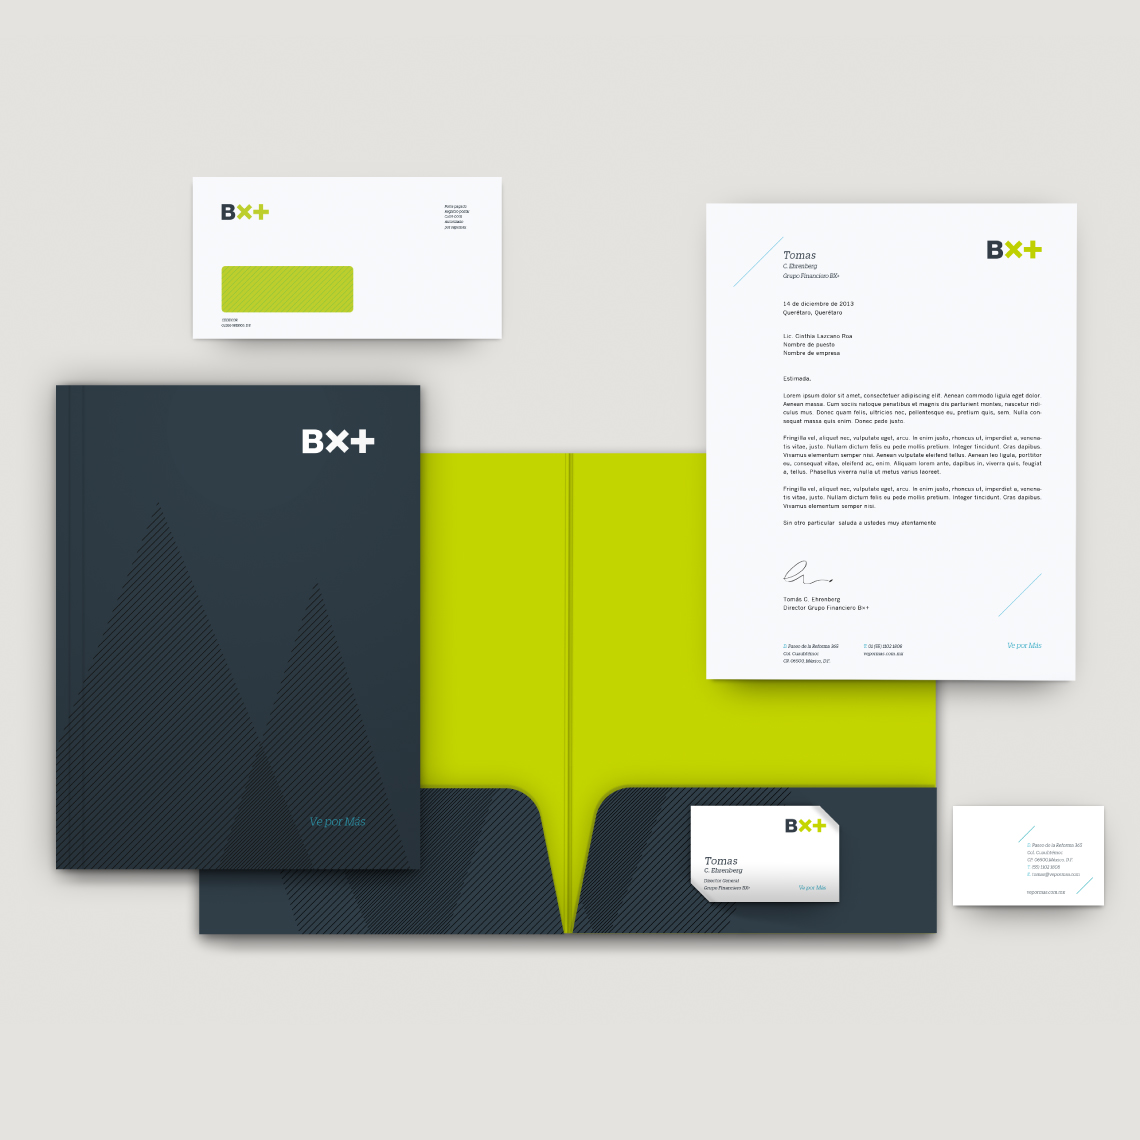 Examples of printed material including letterhead, envelope, business cards and folders